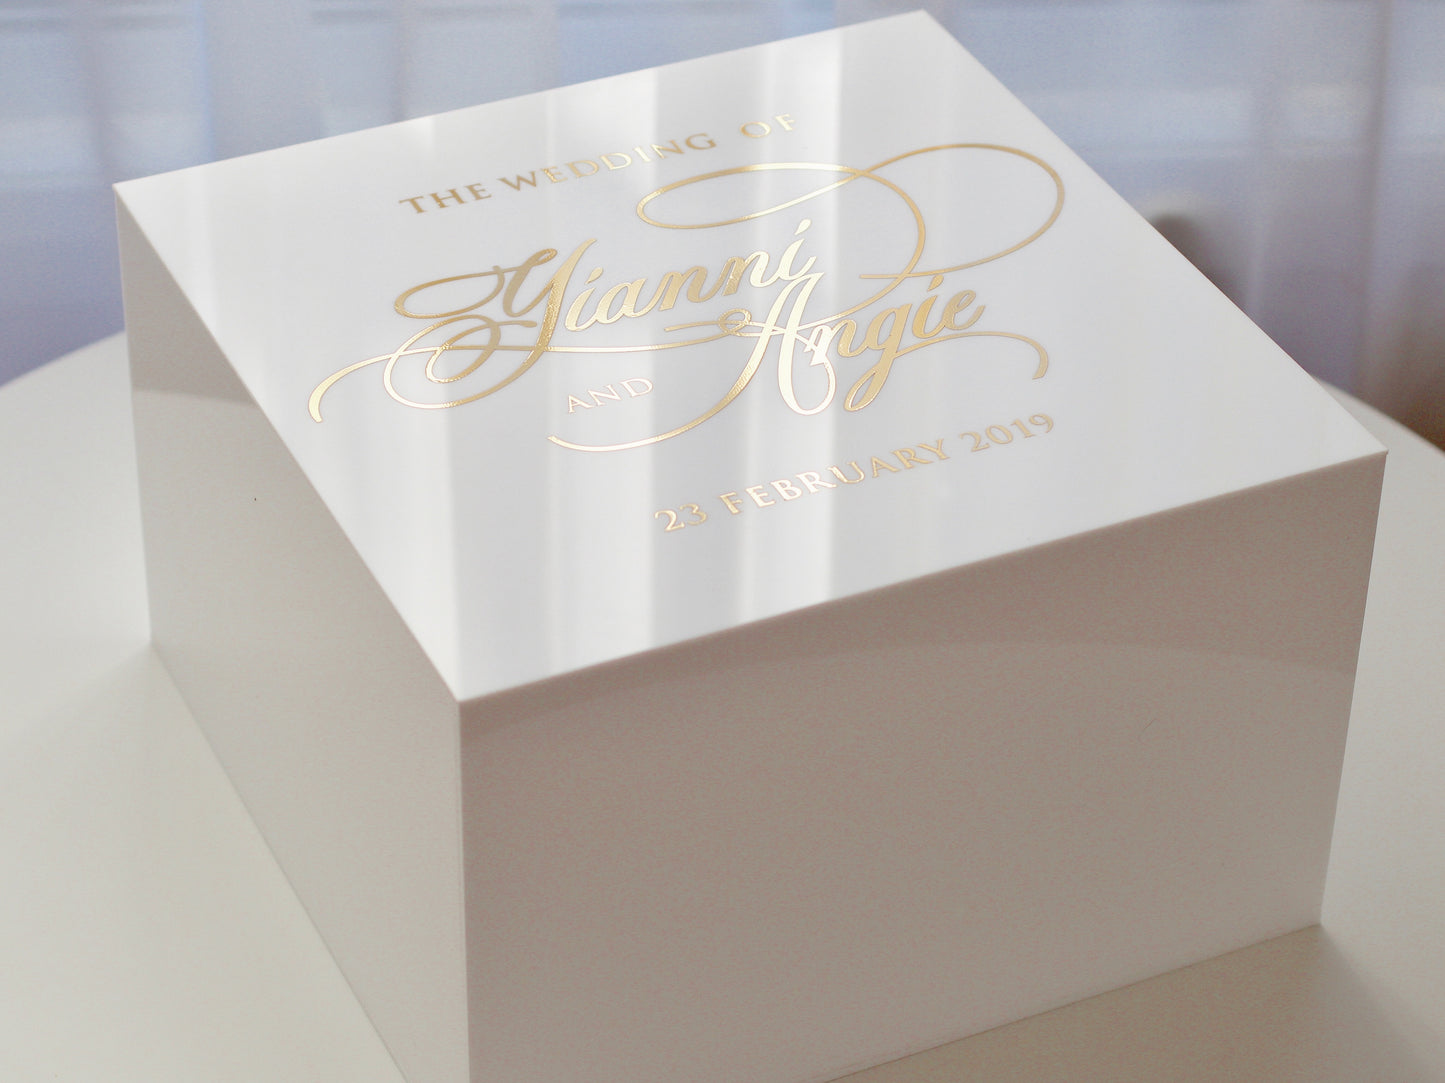 This Extra Large Acrylic Personalised Box with Acrylic Name will have the recipient wondering what’s inside, and delighting at the prospect of having a sturdy and reusable box with their name on it.